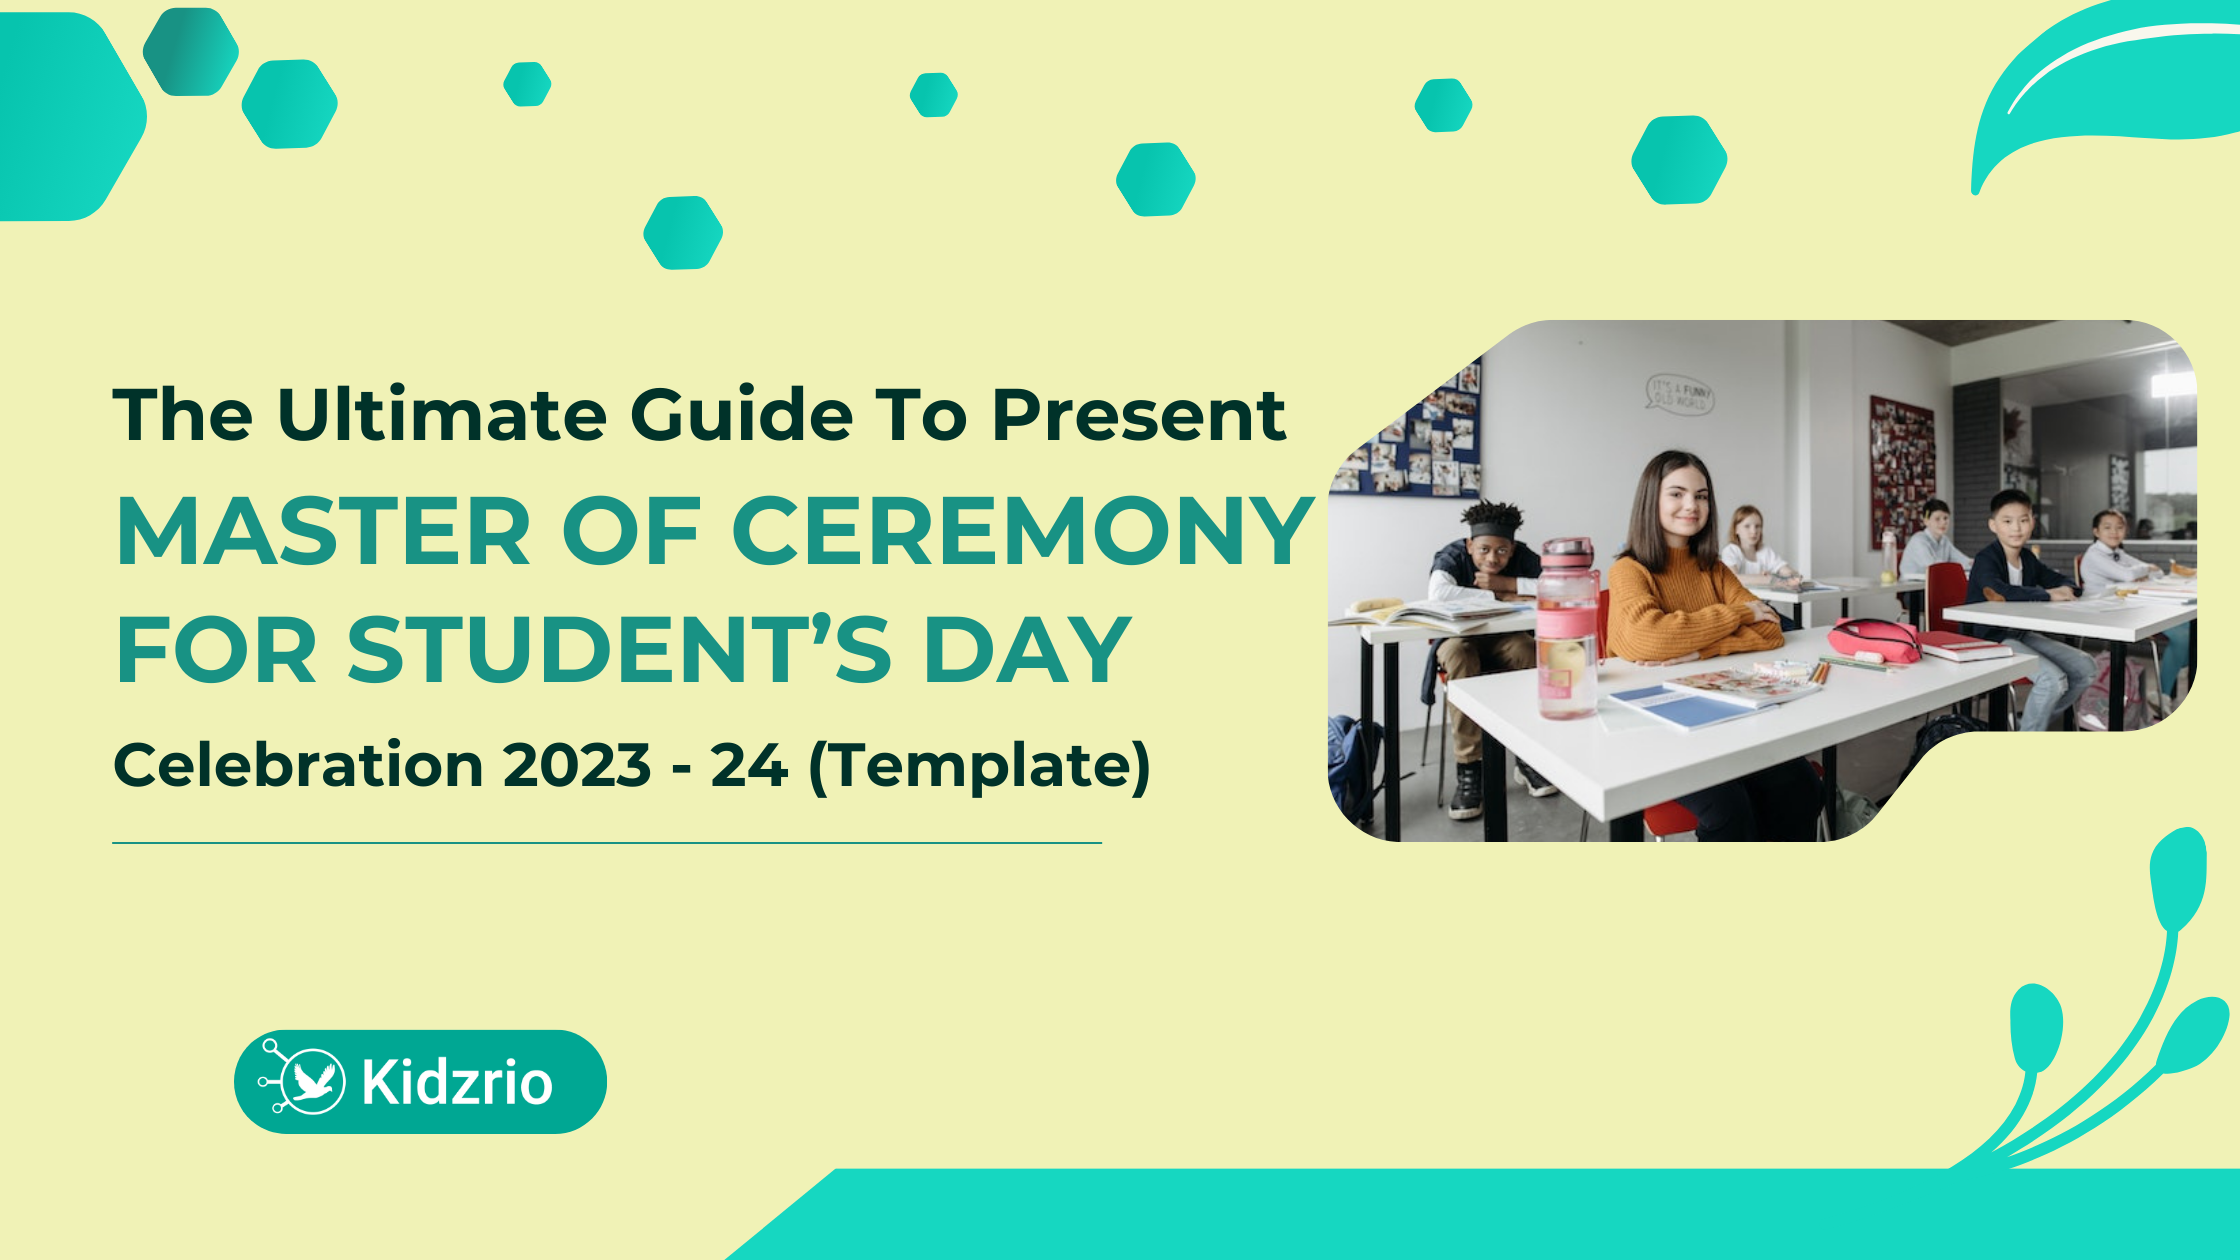 Master of Ceremony for Student's Day Celebration 2023-24 (Template)